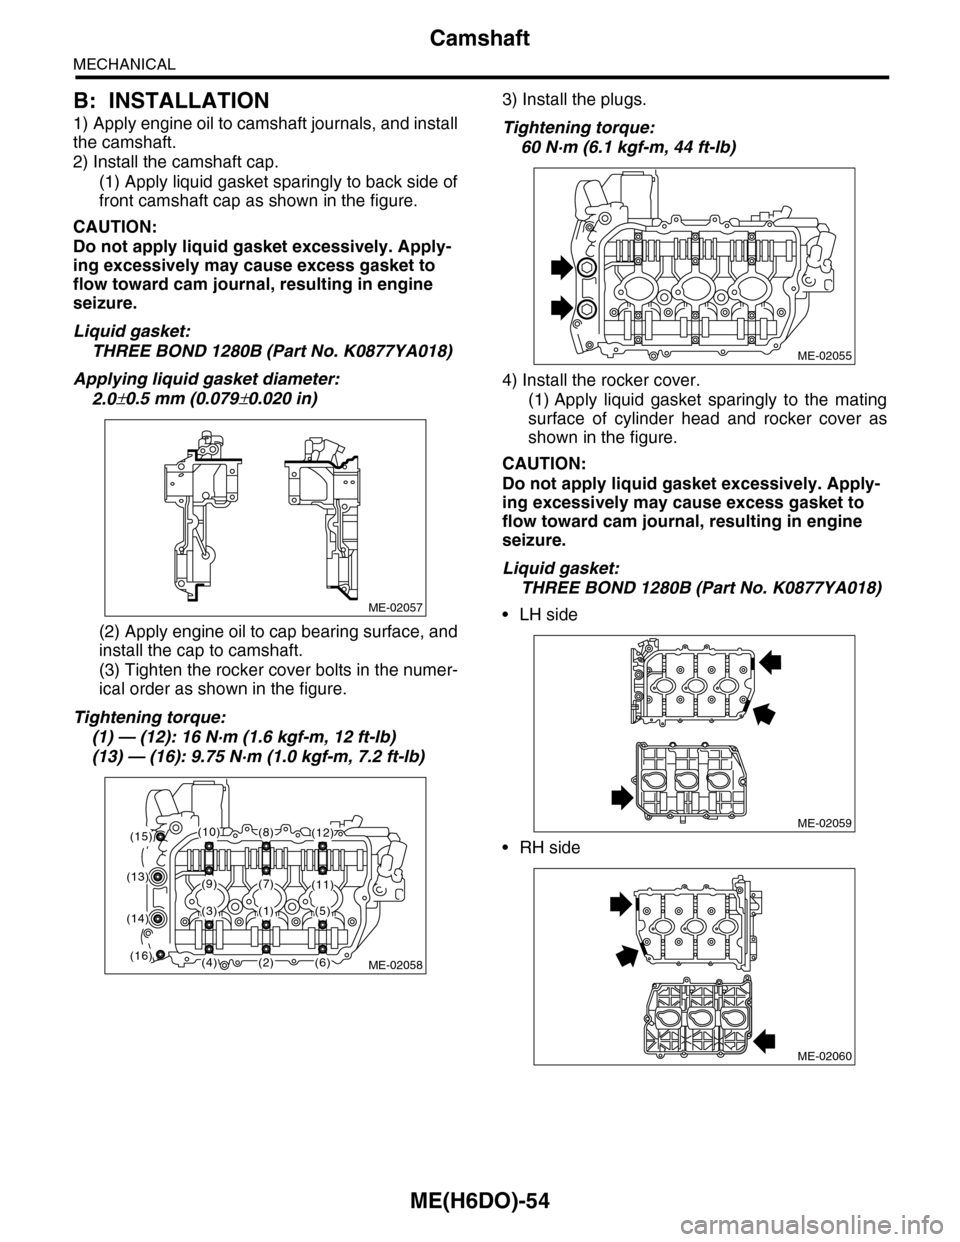 SUBARU TRIBECA 2009 1.G Service Workshop Manual ME(H6DO)-54
Camshaft
MECHANICAL
B: INSTALLATION
1) Apply engine oil to camshaft journals, and install
the camshaft. 
2) Install the camshaft cap.
(1) Apply liquid gasket sparingly to back side of
fron